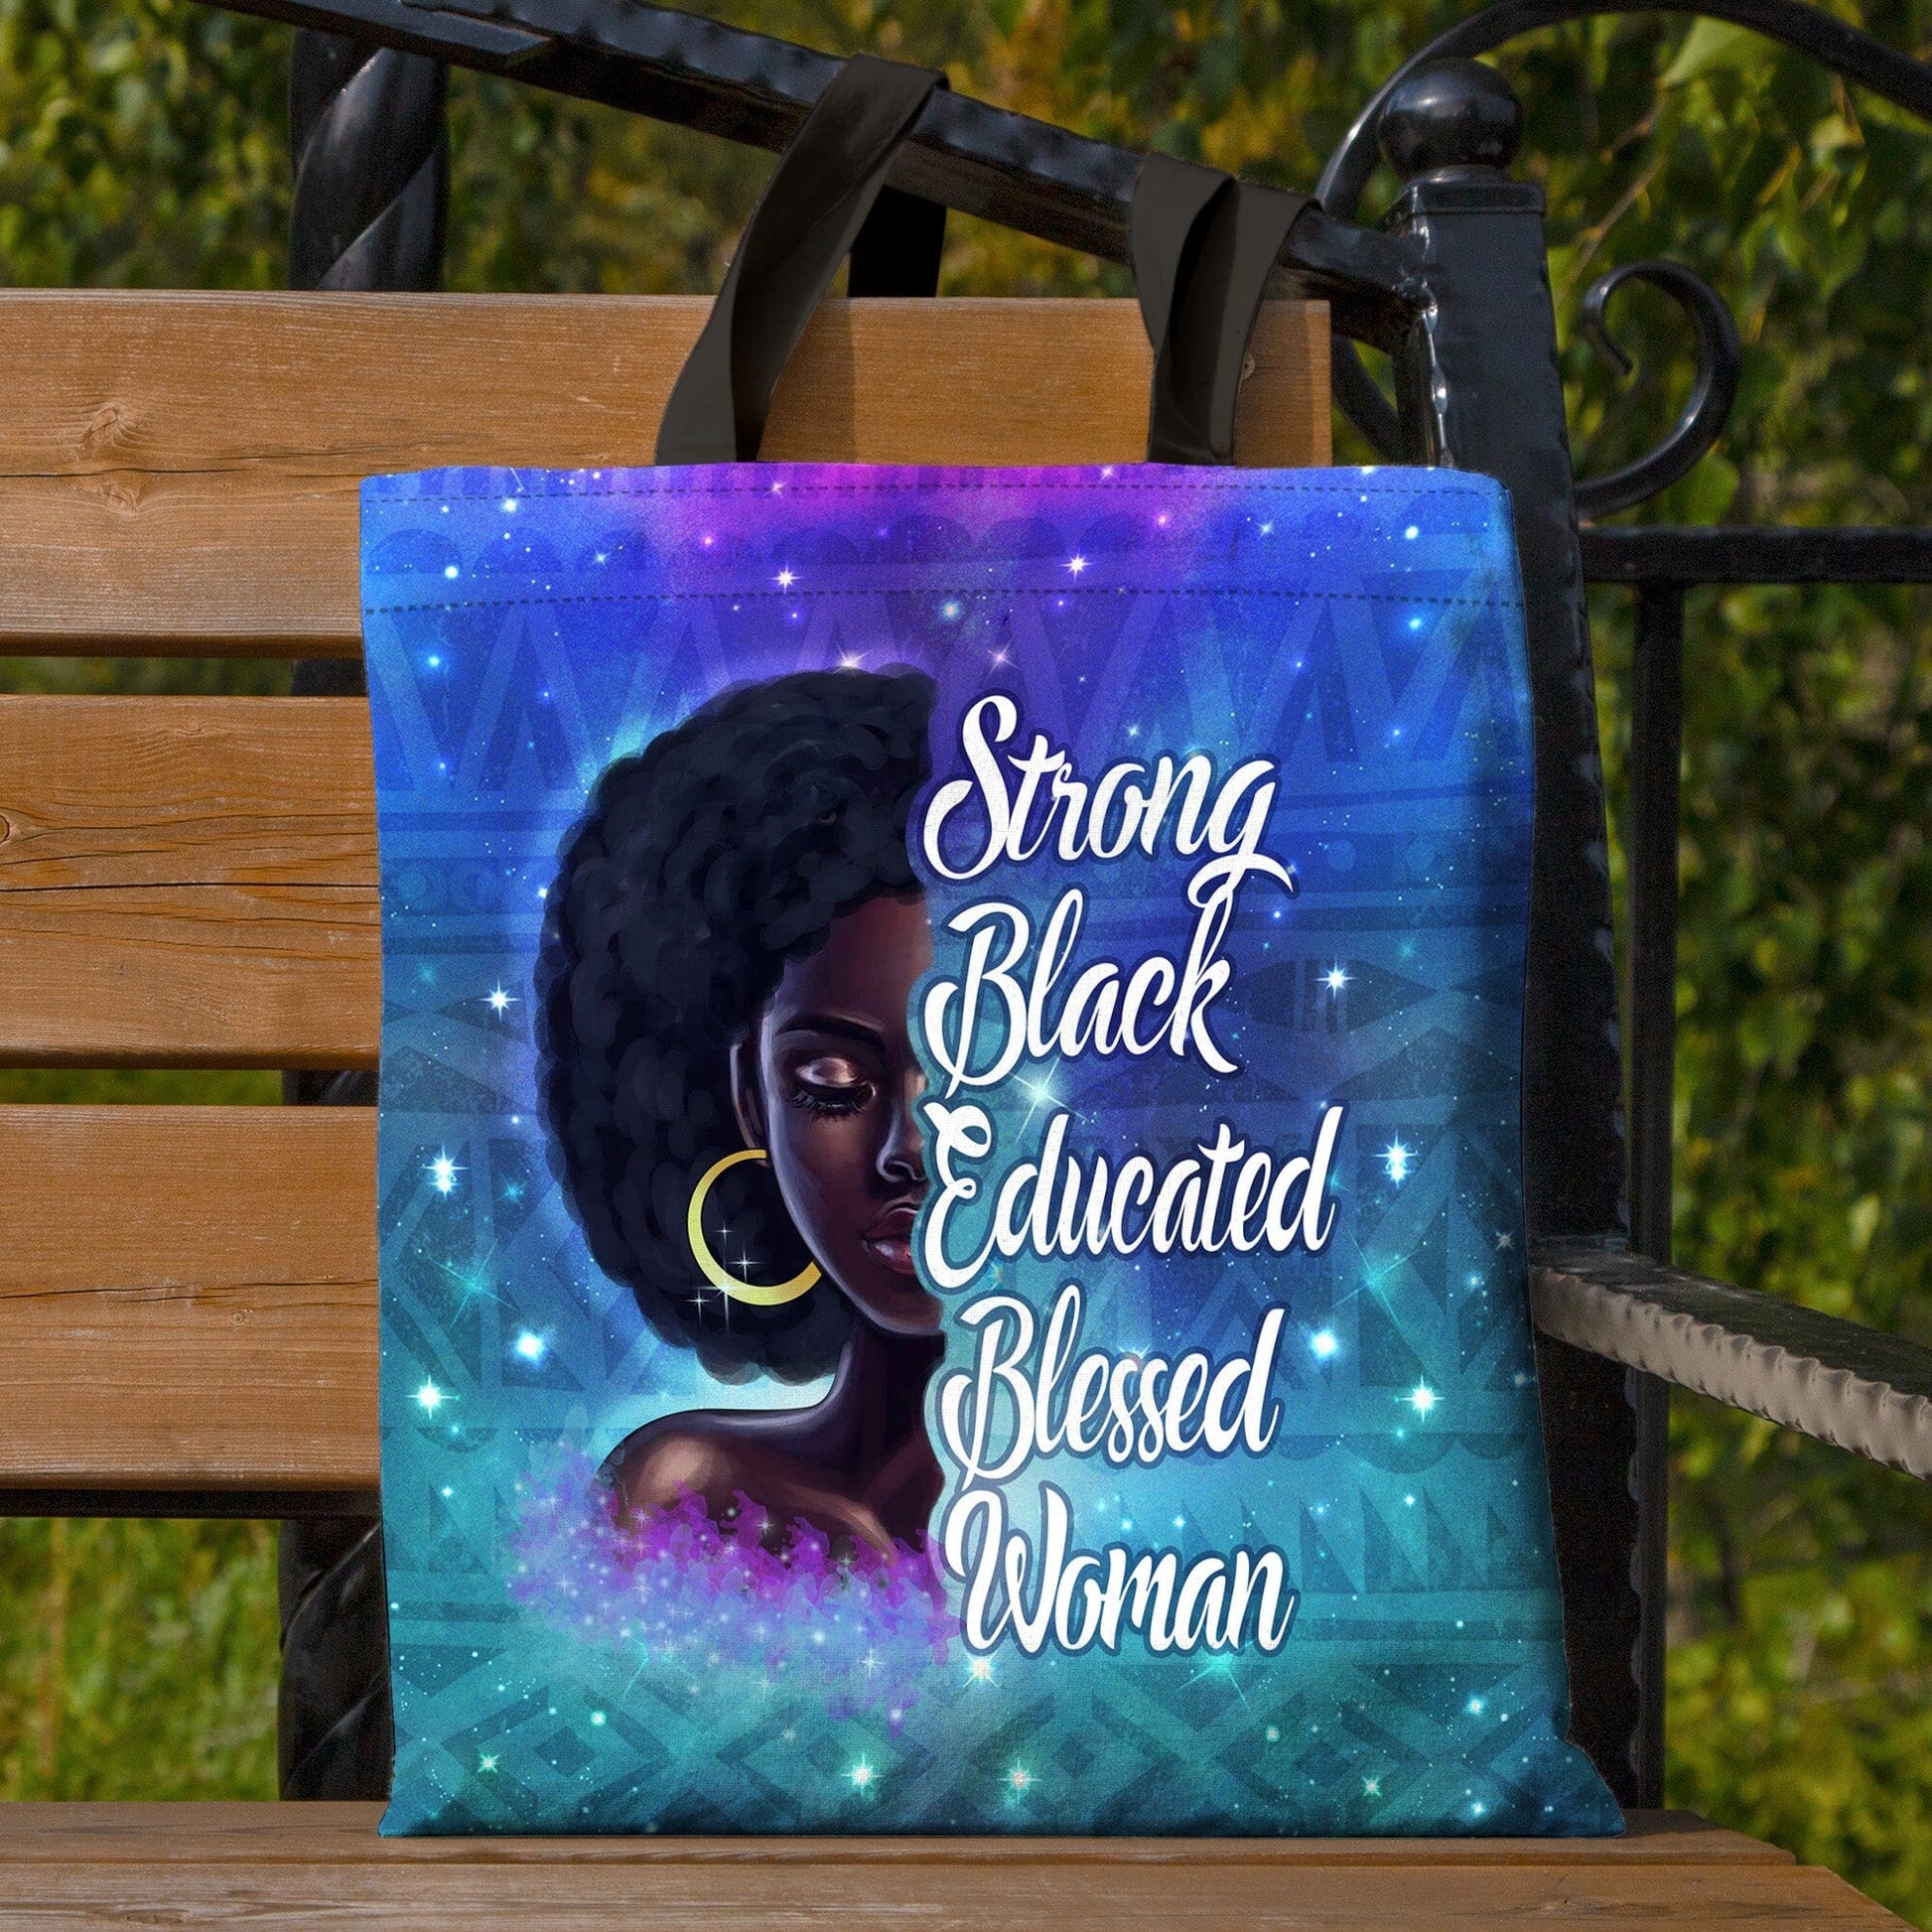 Strong Black Educated Blessed Woman Tote Bag Tote Bag Tianci 